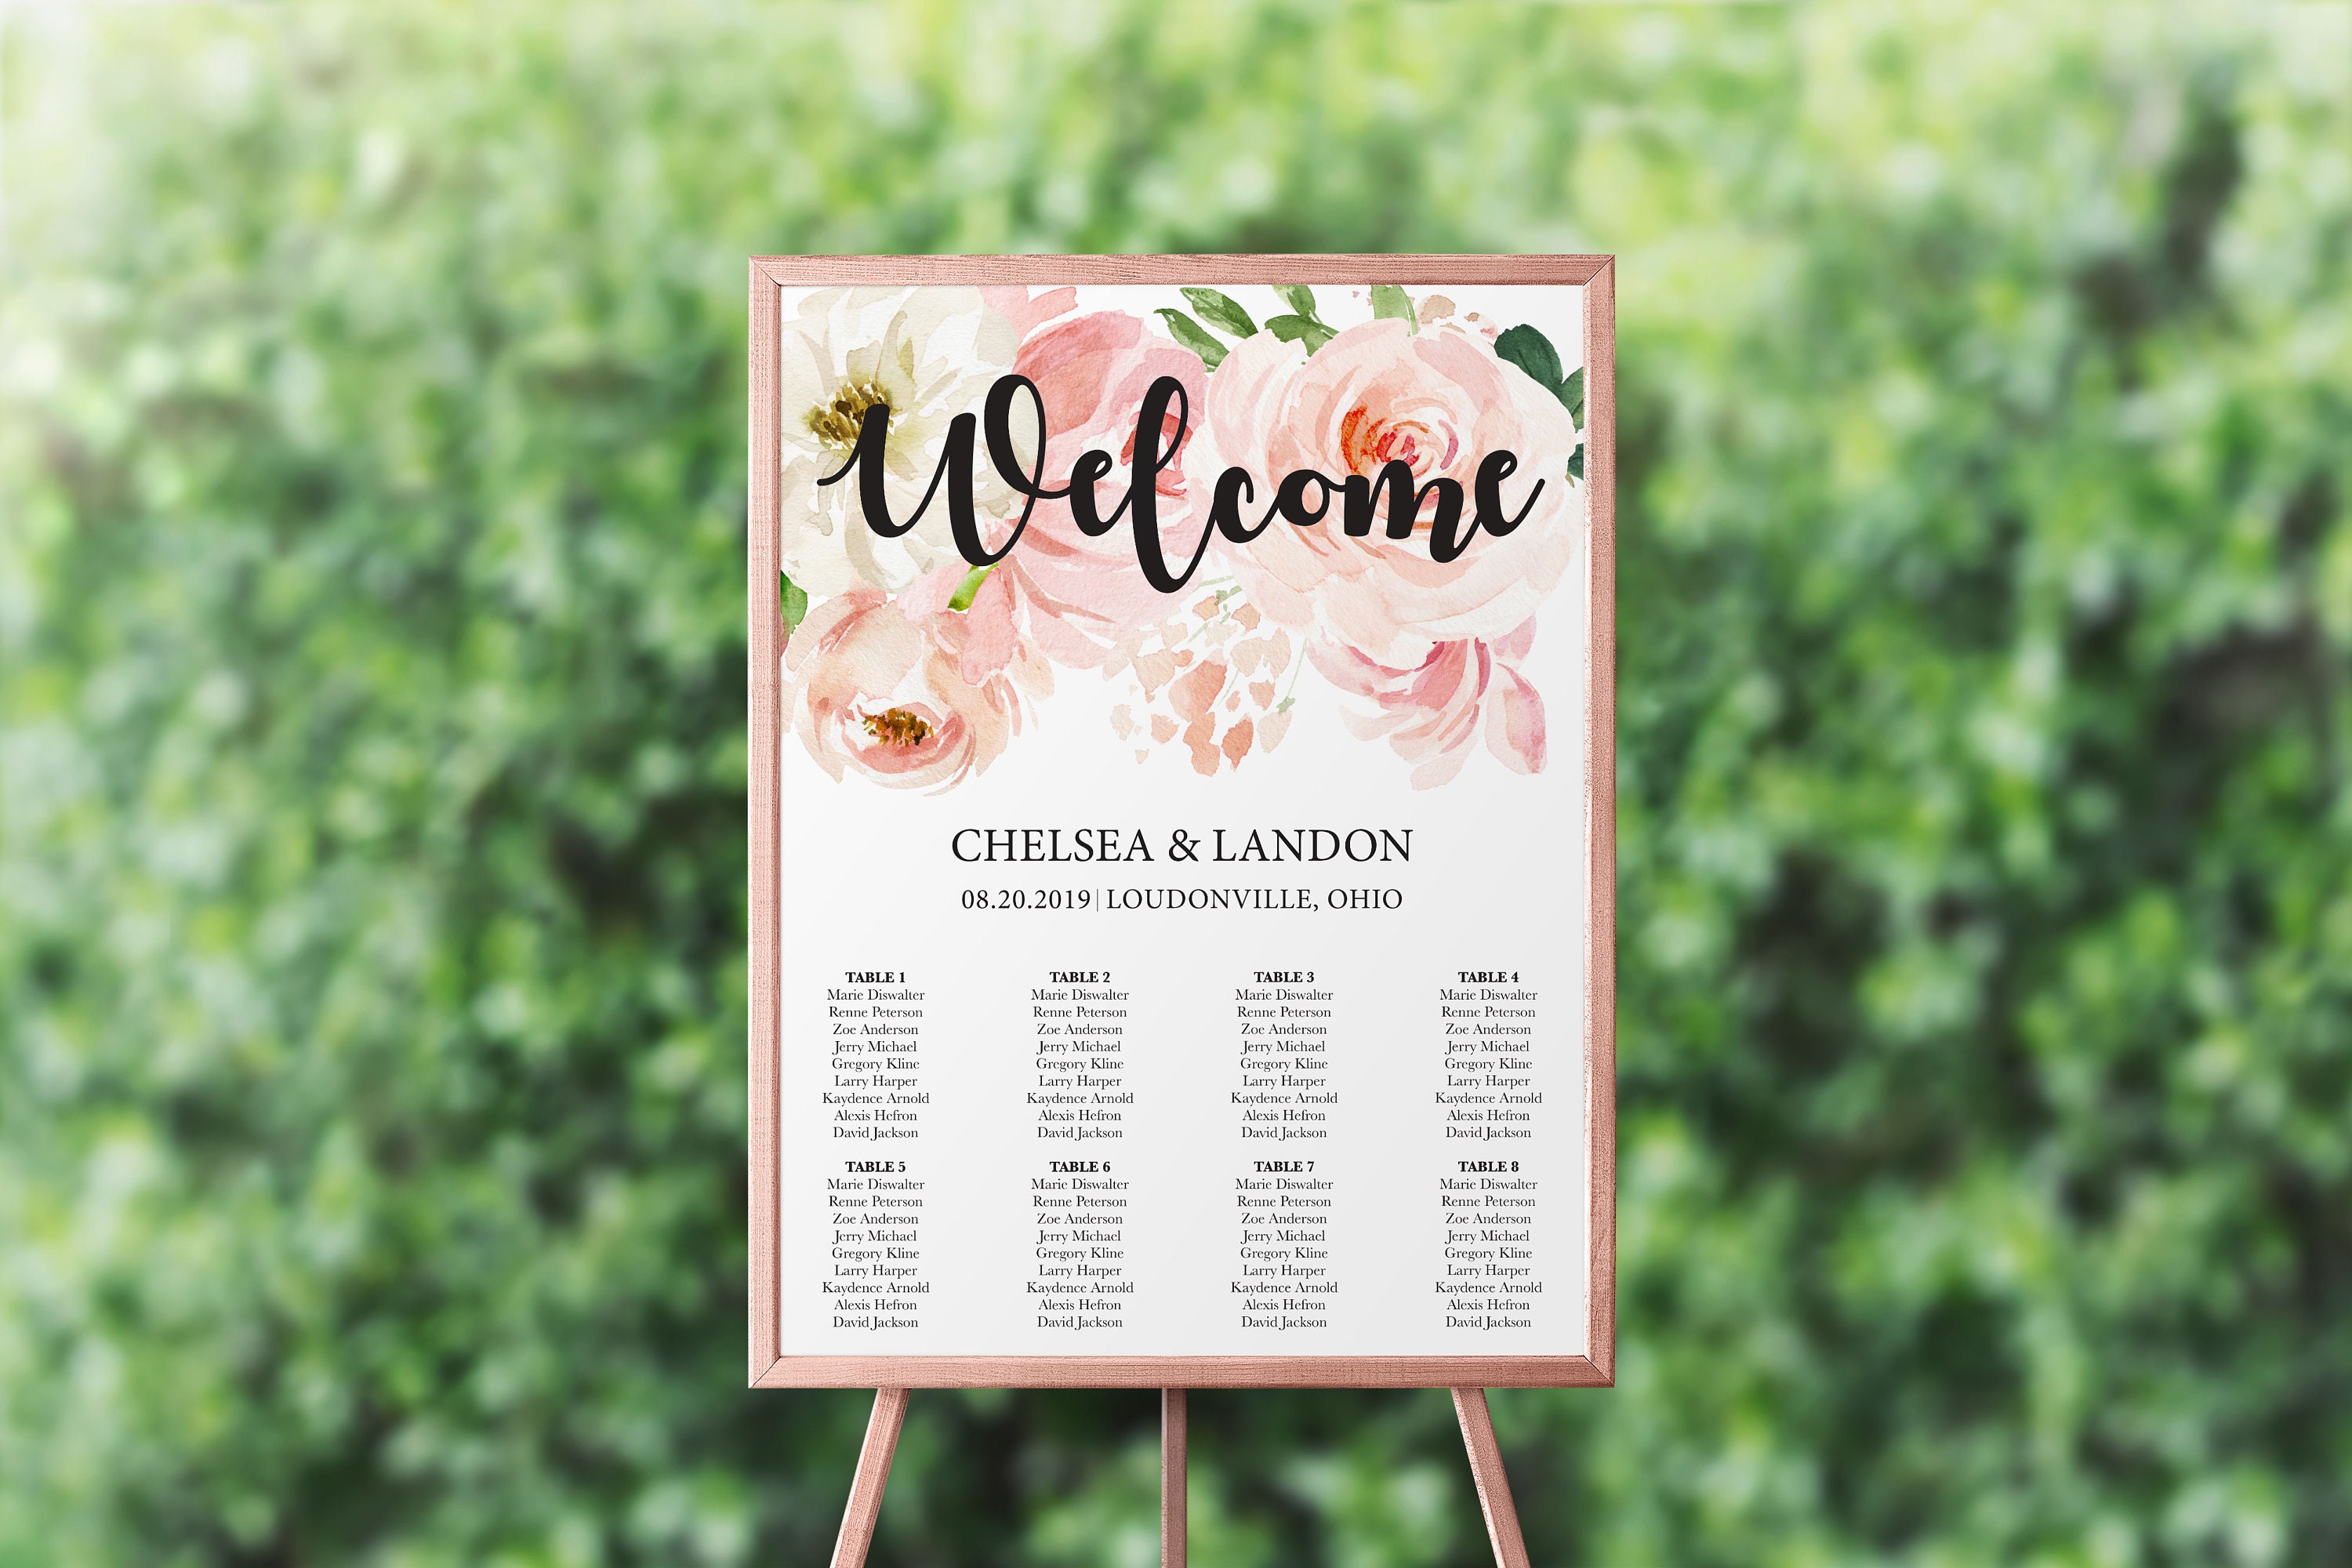 Personalized Wedding Seating Chart